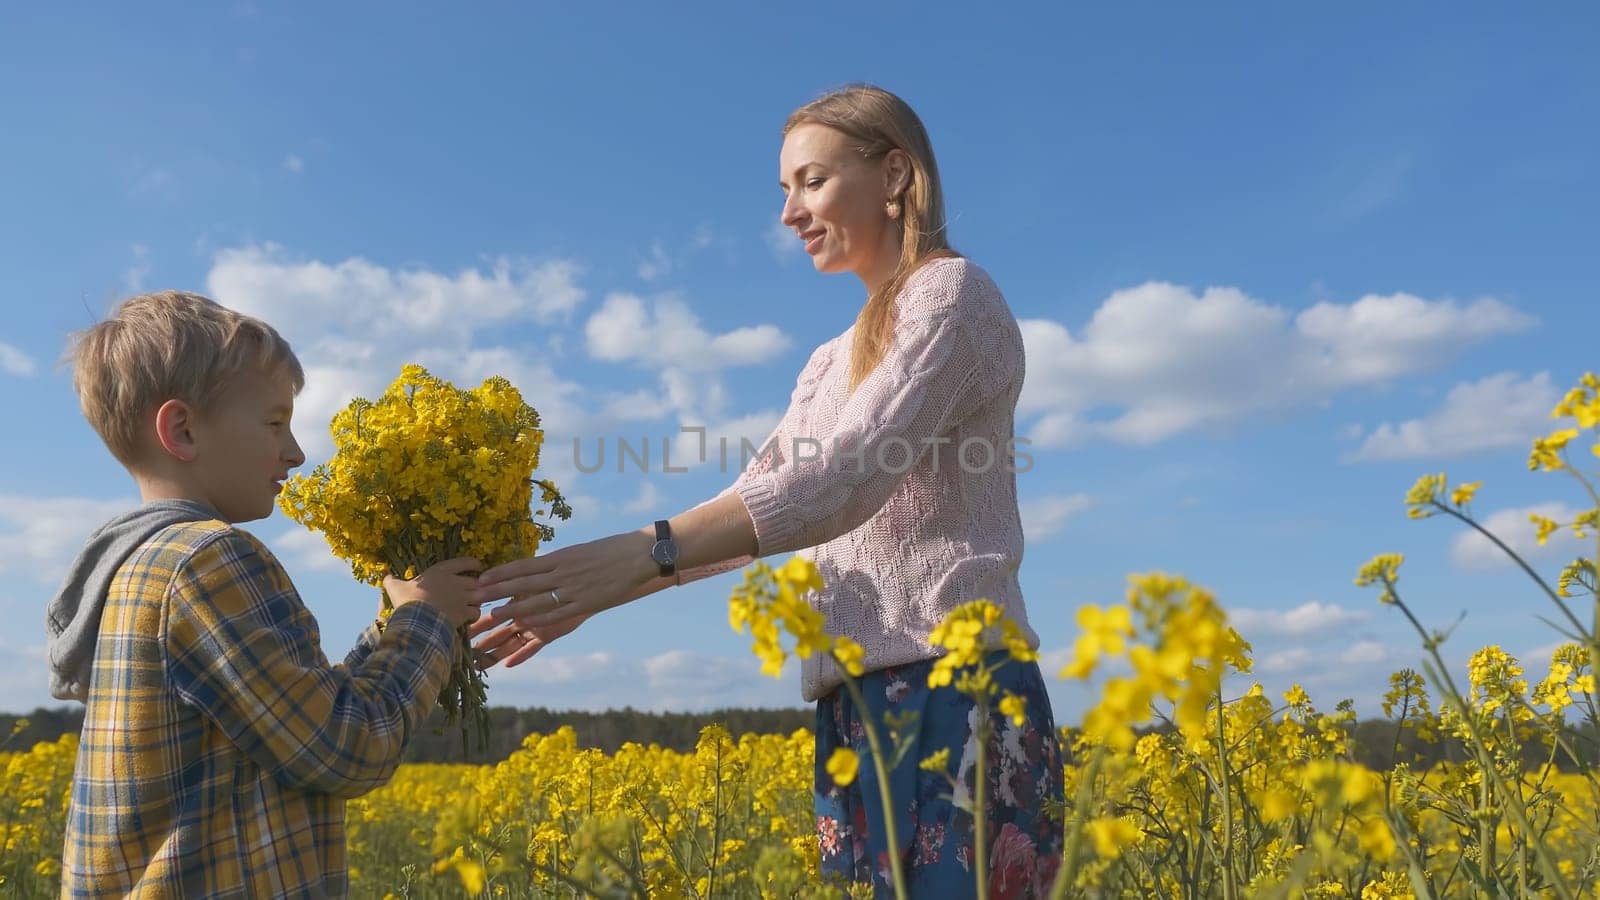 A grateful son gives his mother flowers in a rapeseed field. by DovidPro